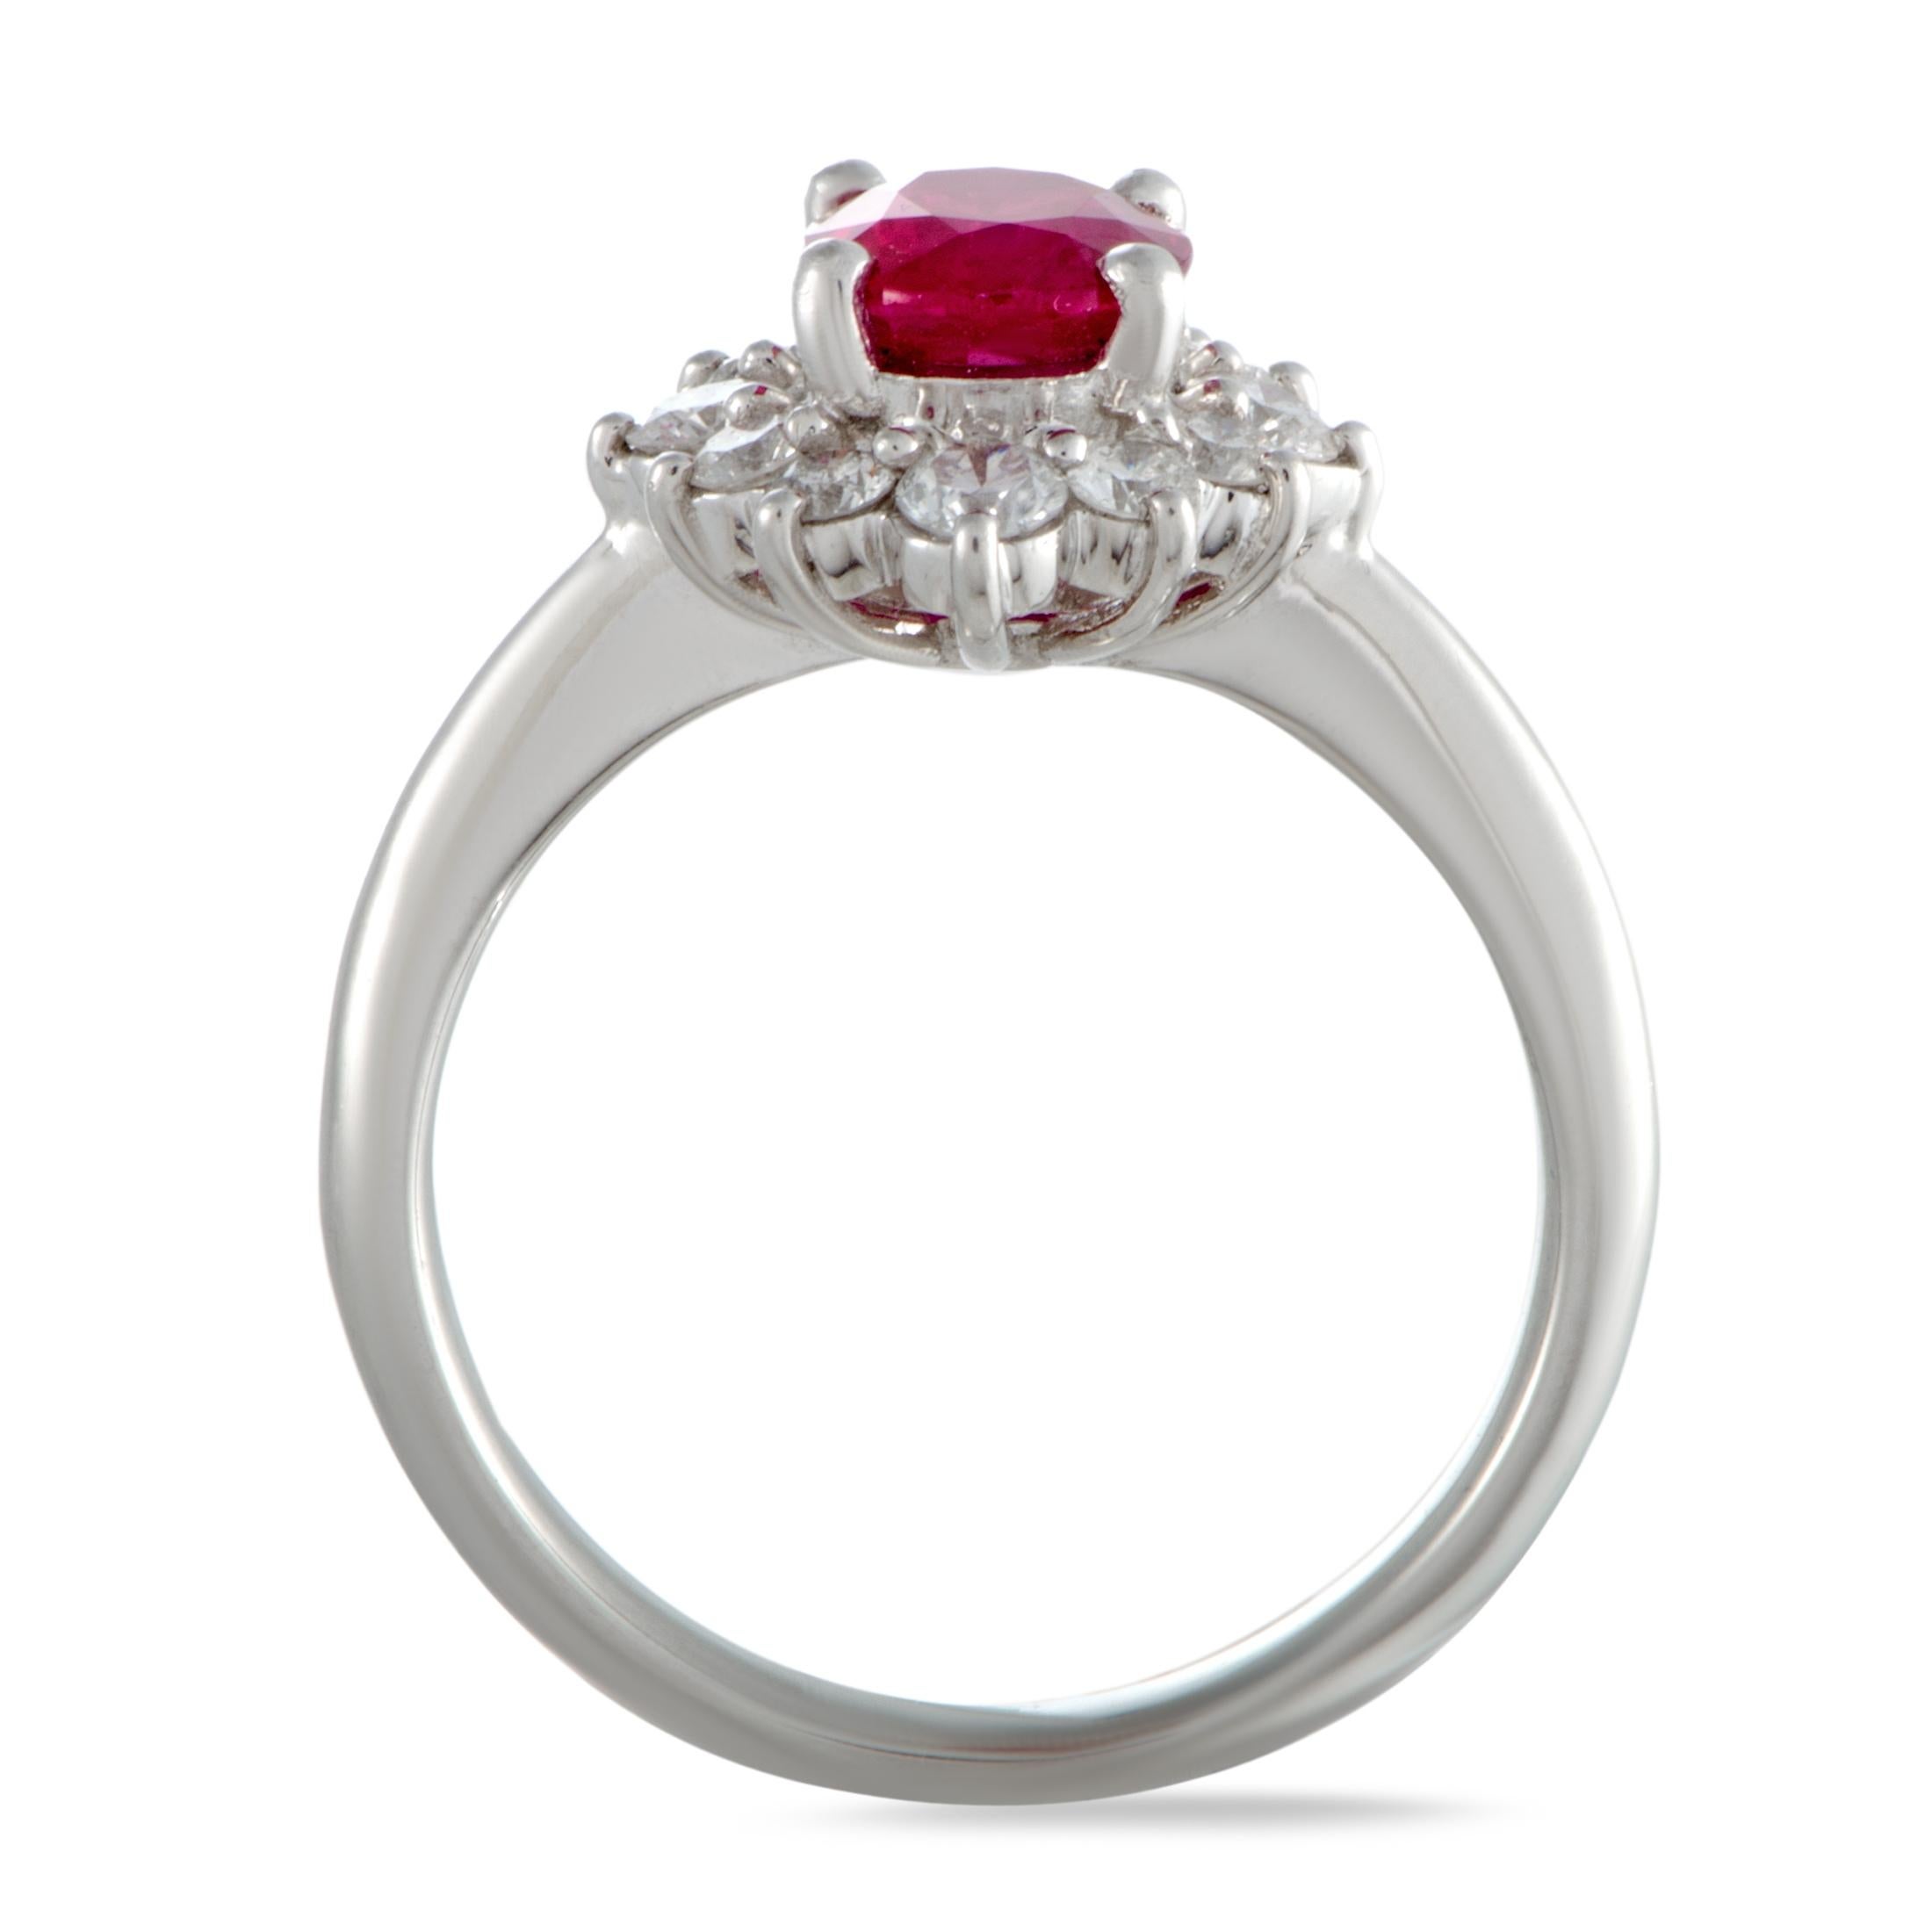 Provided a perfectly fitting pedestal in the form of flawlessly polished platinum and charmingly scintillating diamonds weighing in total 0.46 carats, the fabulous ruby weighing 1.09 carats exudes gorgeous femininity to top off a truly sumptuous